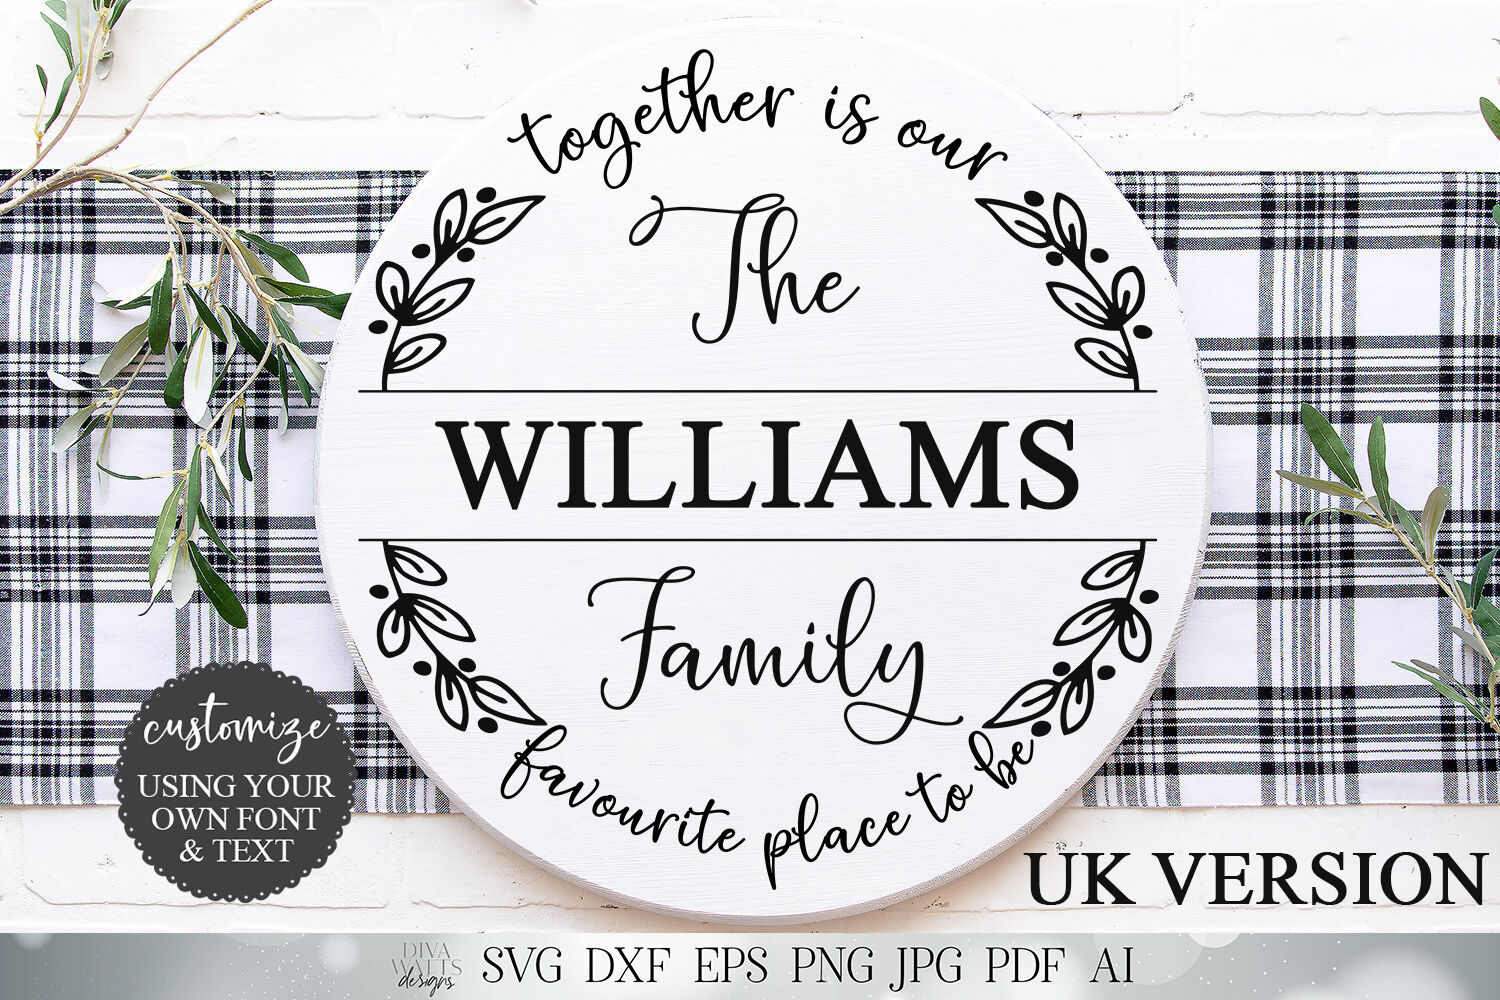 Download Together Is Our Favourite Place To Be Svg Uk Version Dxf And More By Diva Watts Designs Thehungryjpeg Com